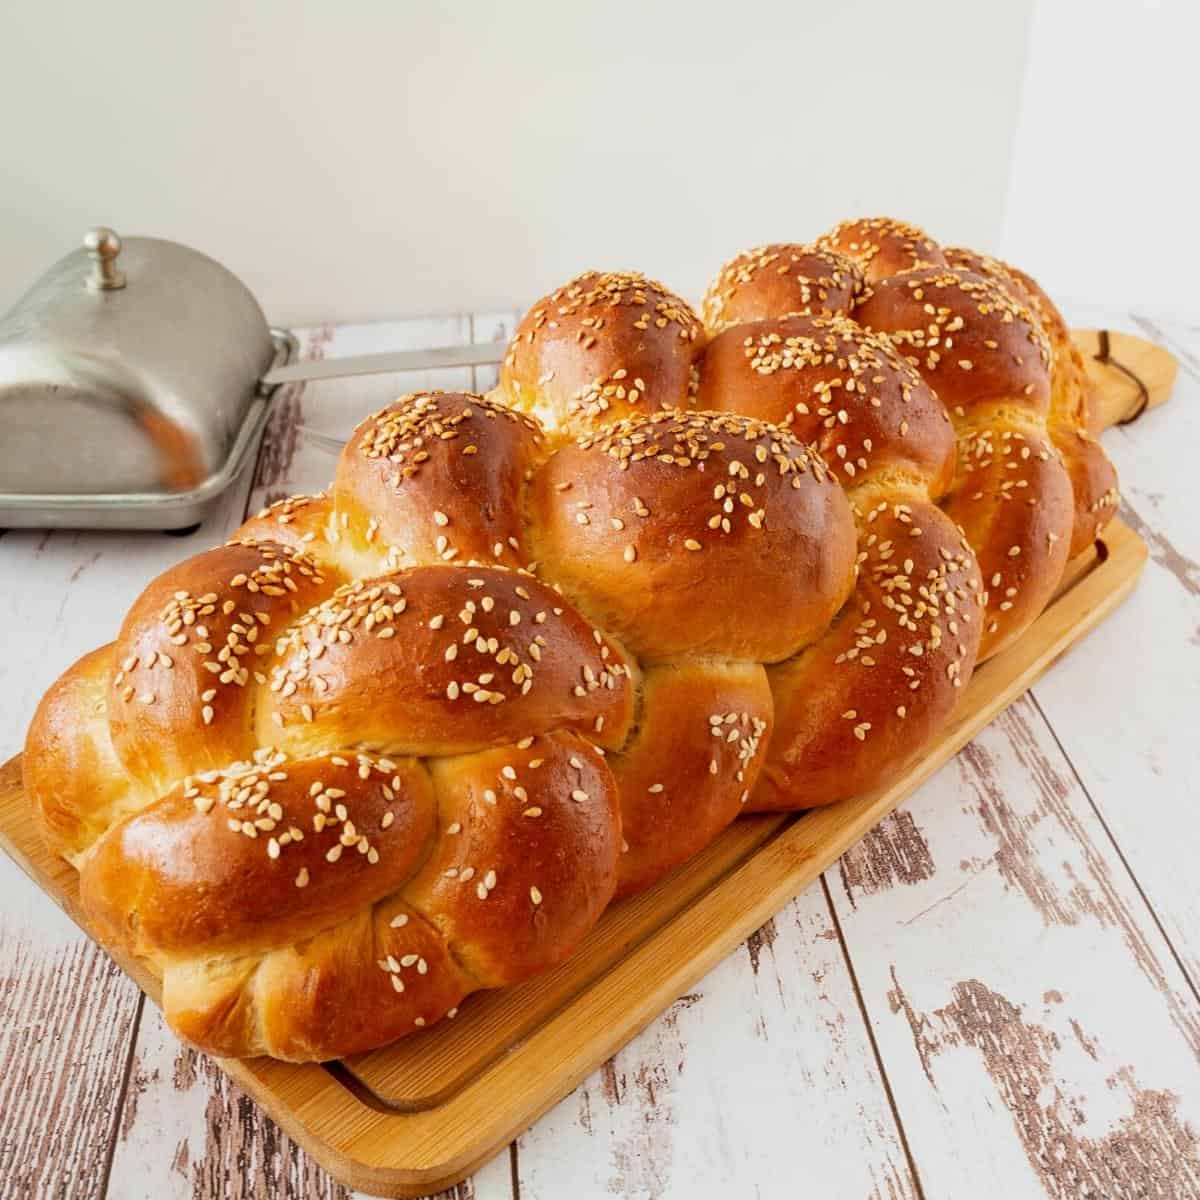 Challah made with milk and honey on the table.